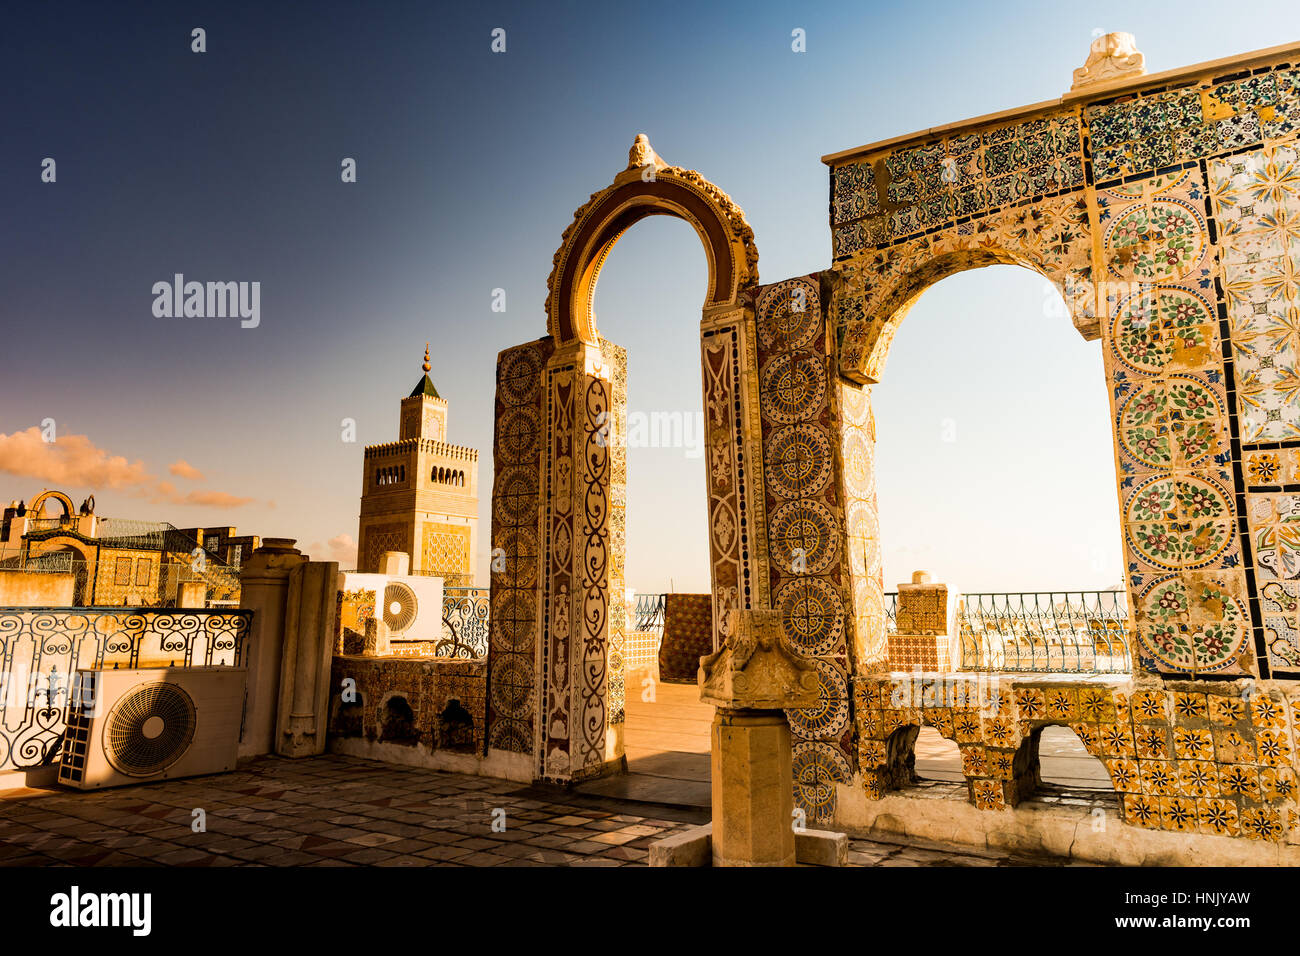 Detail of traditional arabic architecture in cityscape at dawn with dramatic sunlight. Tunisia, North africa. Stock Photo